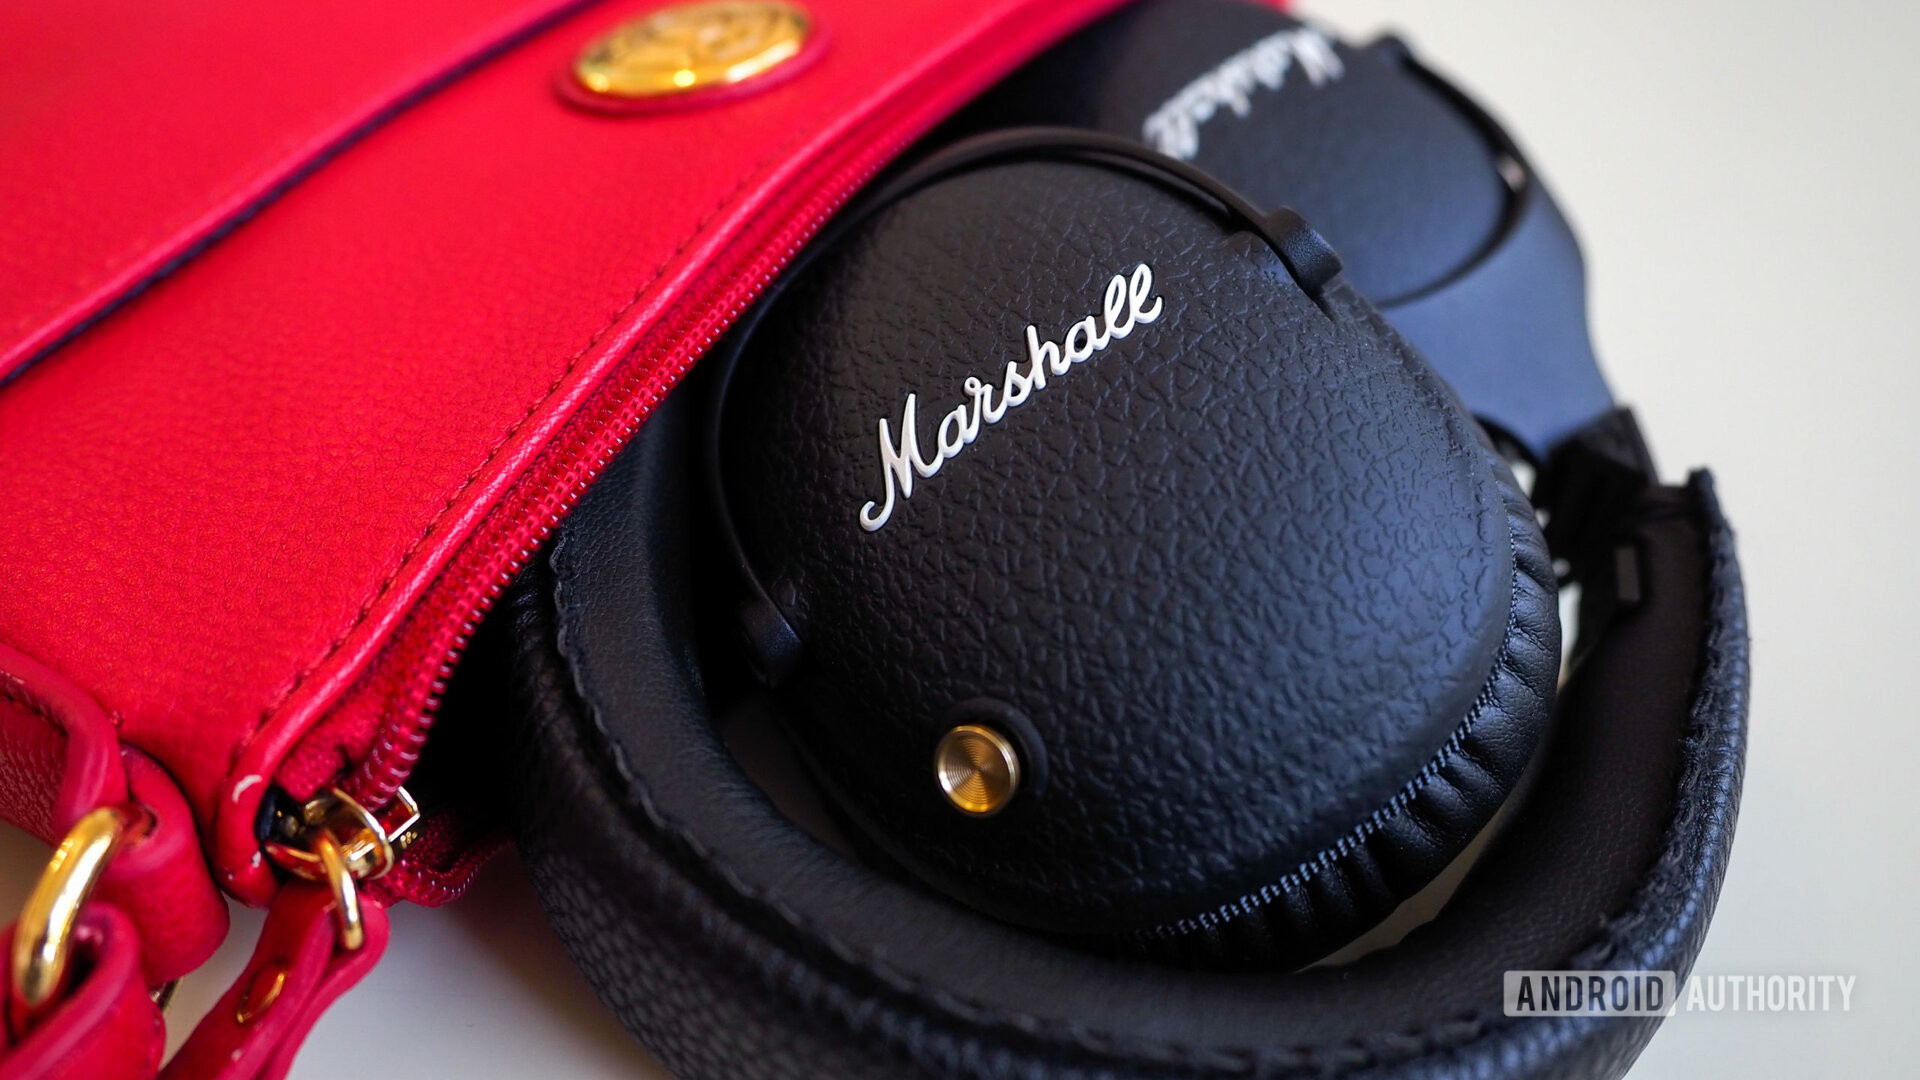 I’ve tried Sony and Bose, but I keep coming back to these Marshall headphones